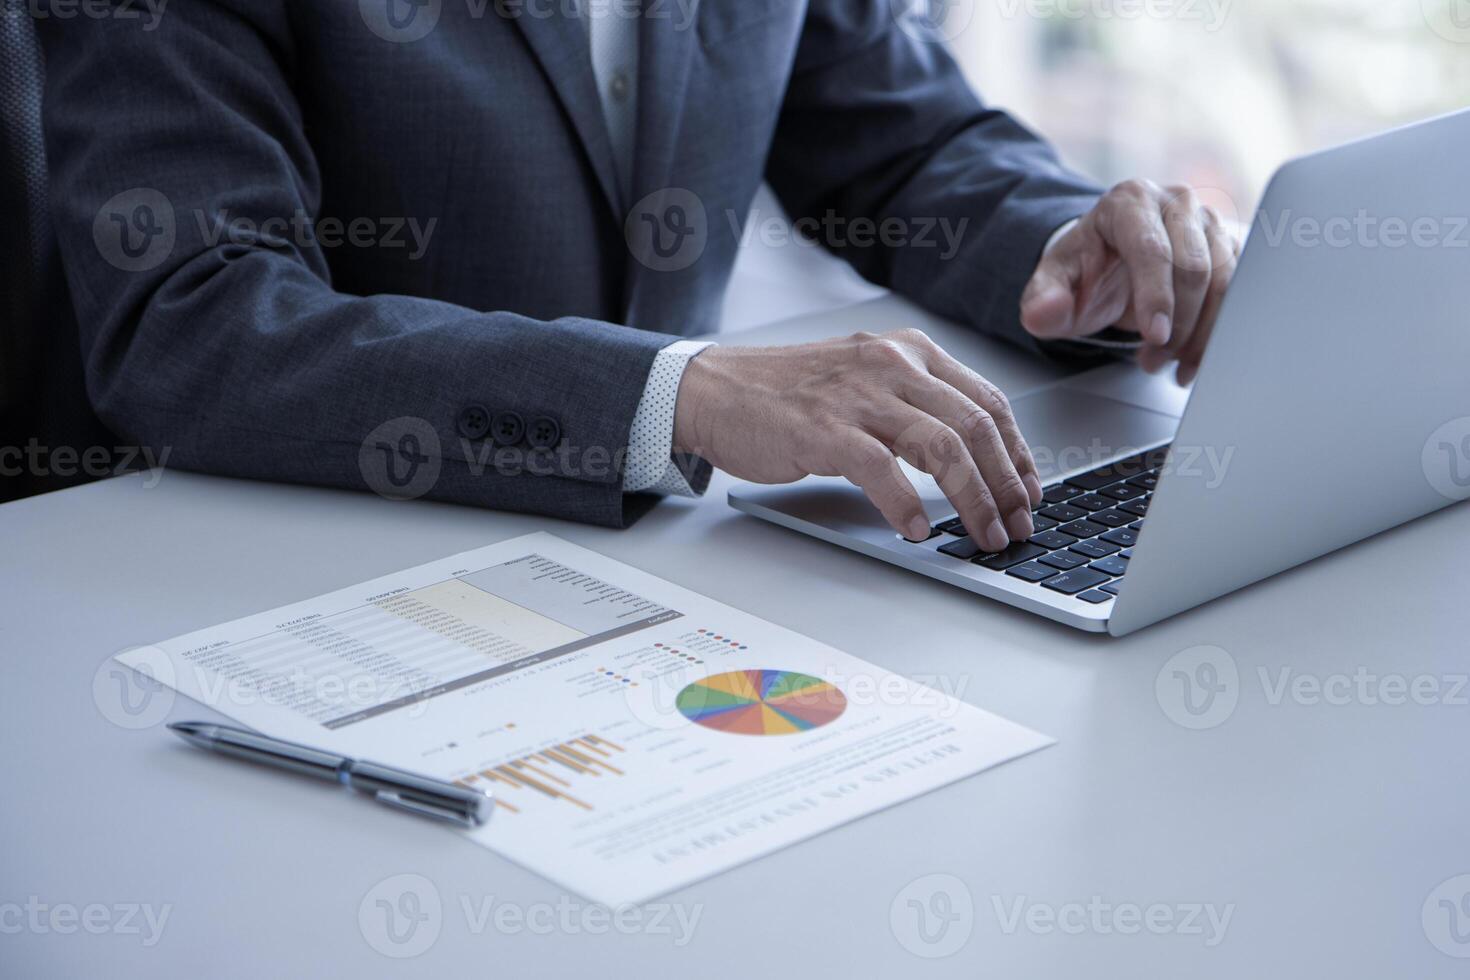 Reviewing business information and a return on investment photo